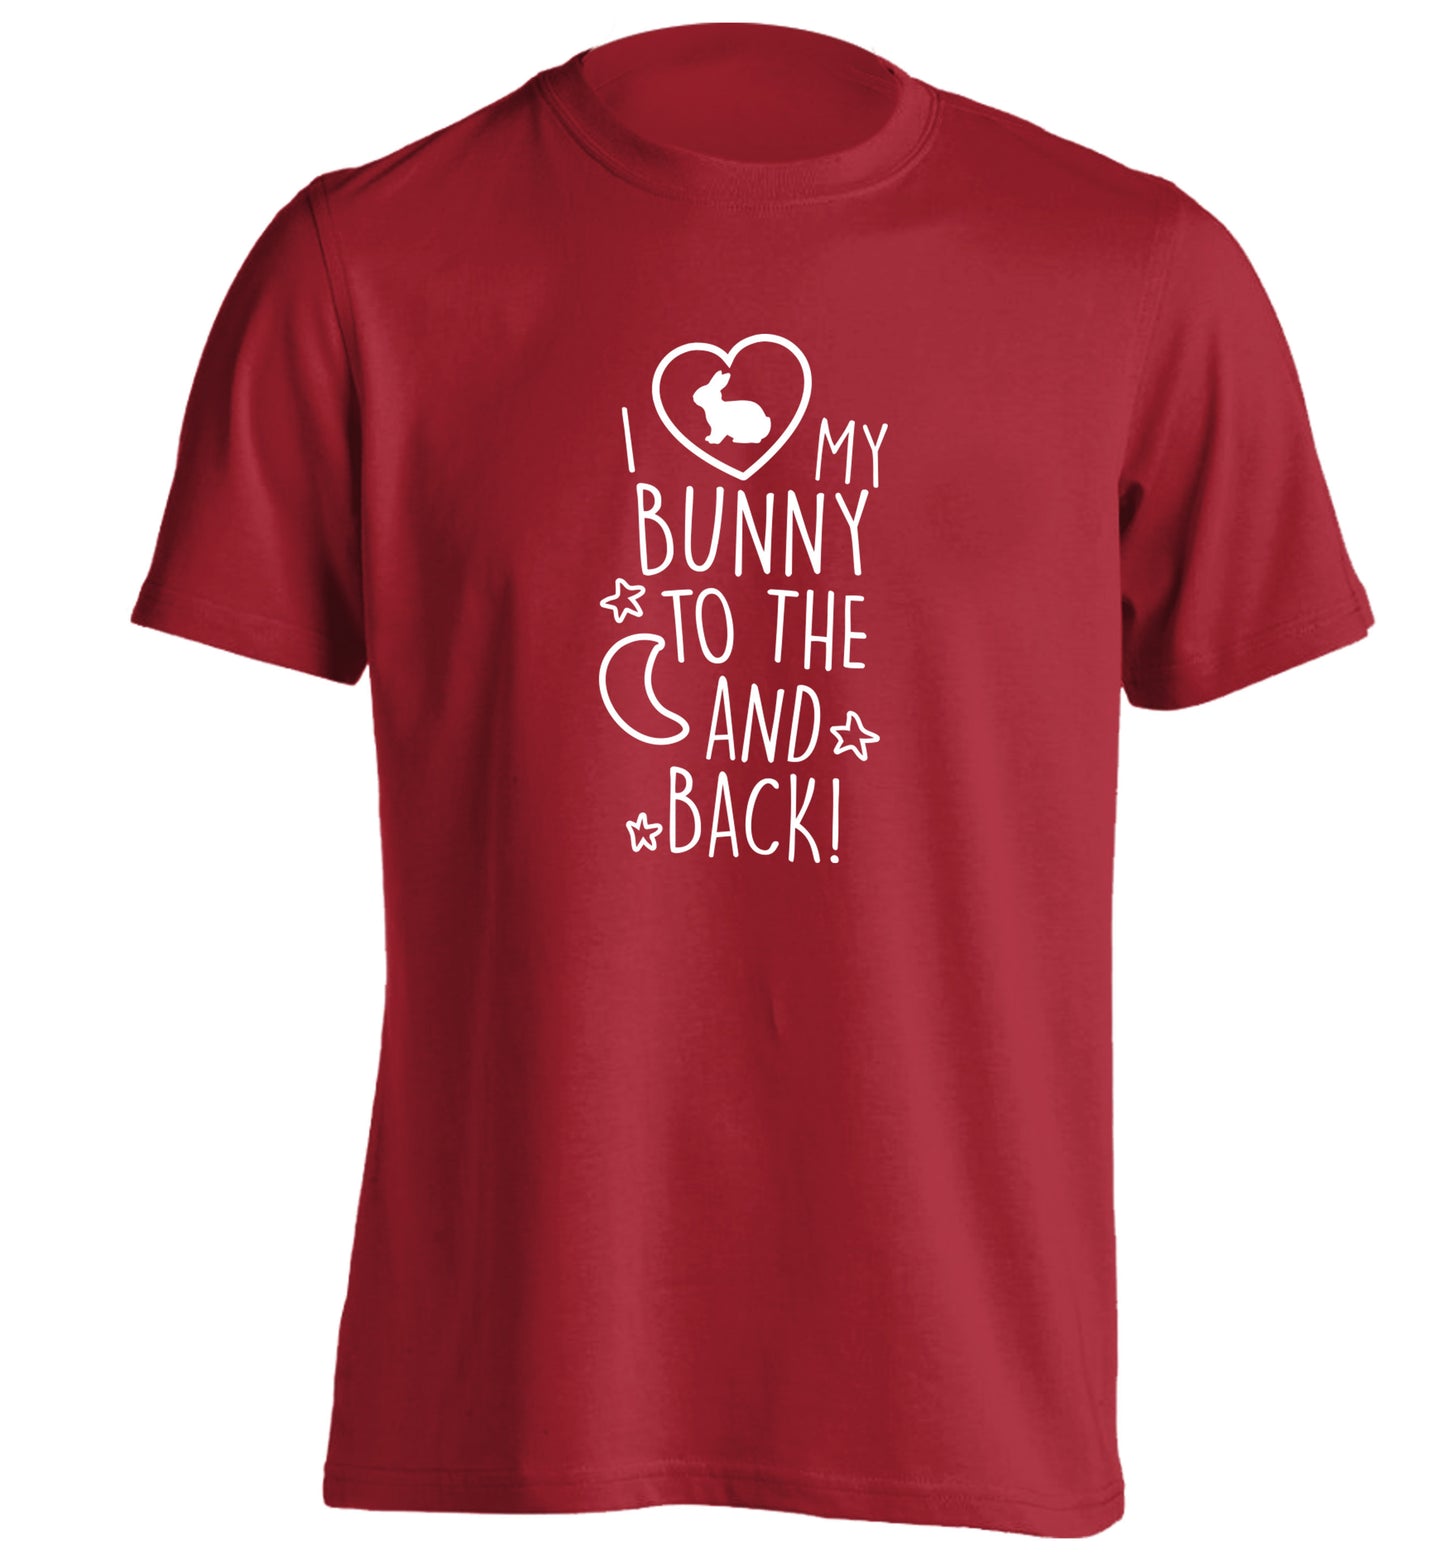 I love my bunny to the moon and back adults unisex red Tshirt 2XL